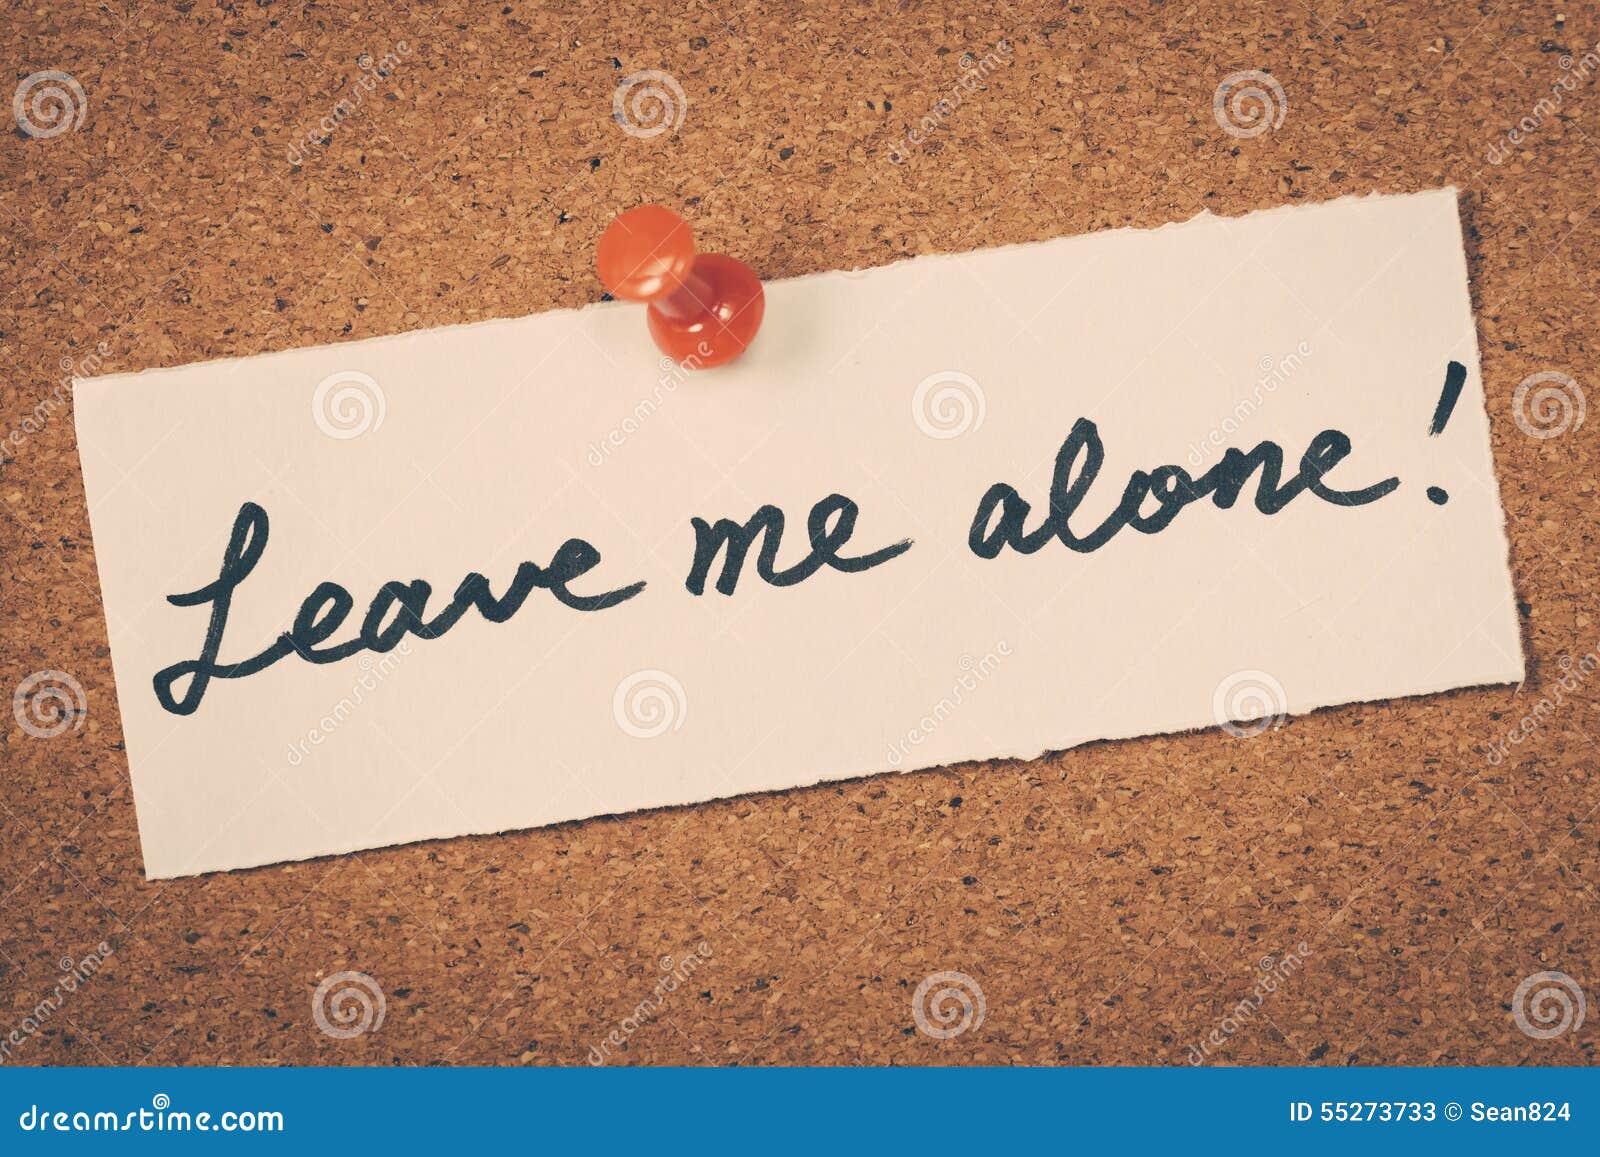 Leave me alone stock image. Image of stress, anger, text - 55273733